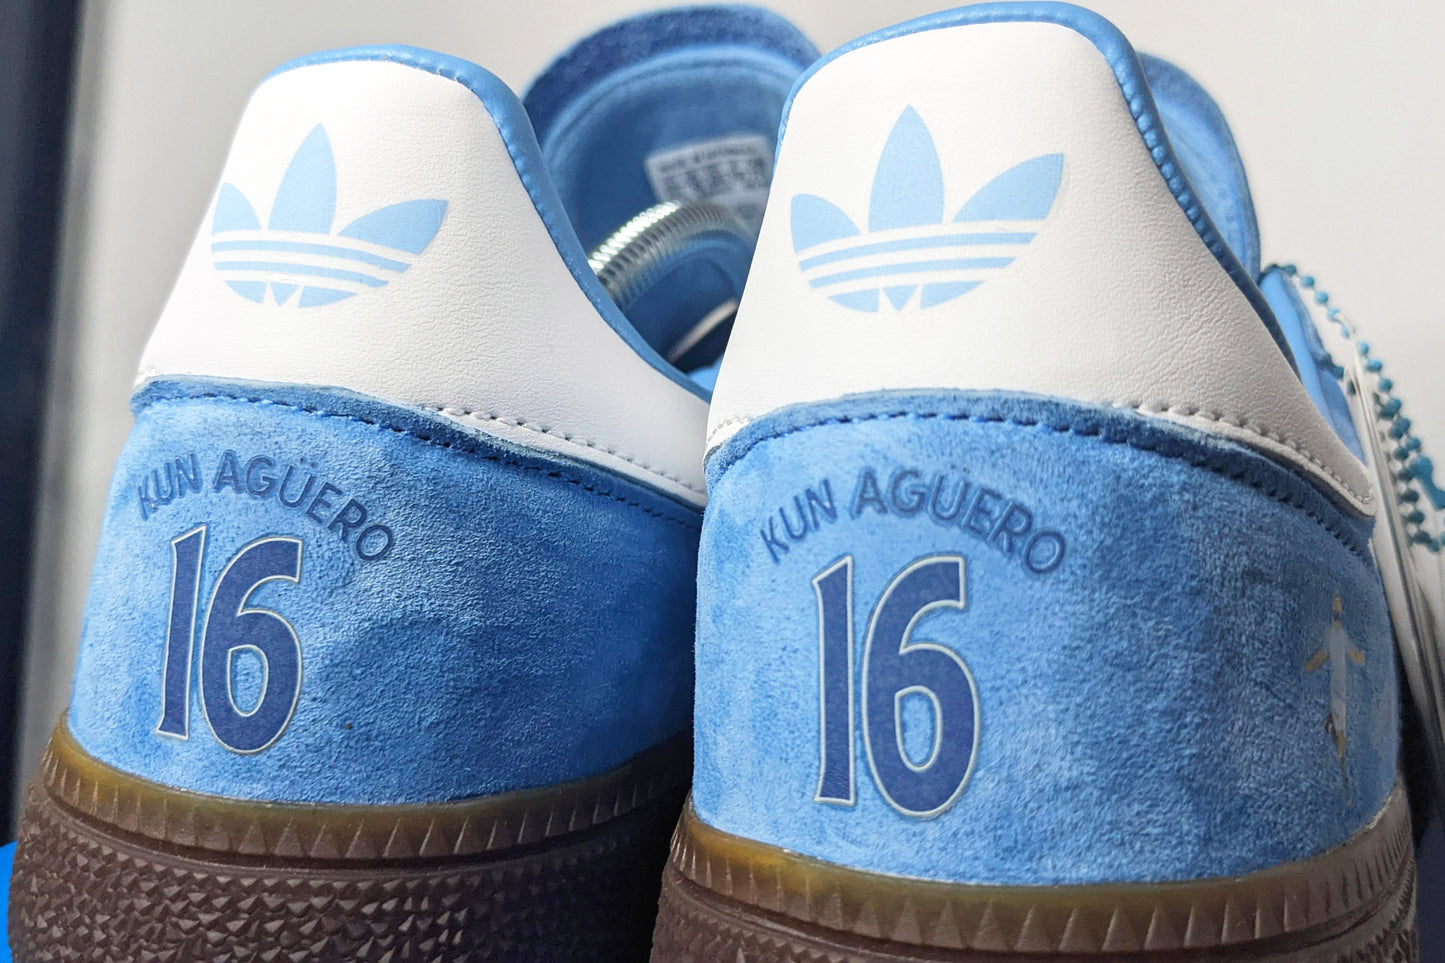 Limited edition Manchester City Sergio Aguero inspired Blue /White/ Adidas Handball Spezial trainers / sneakers